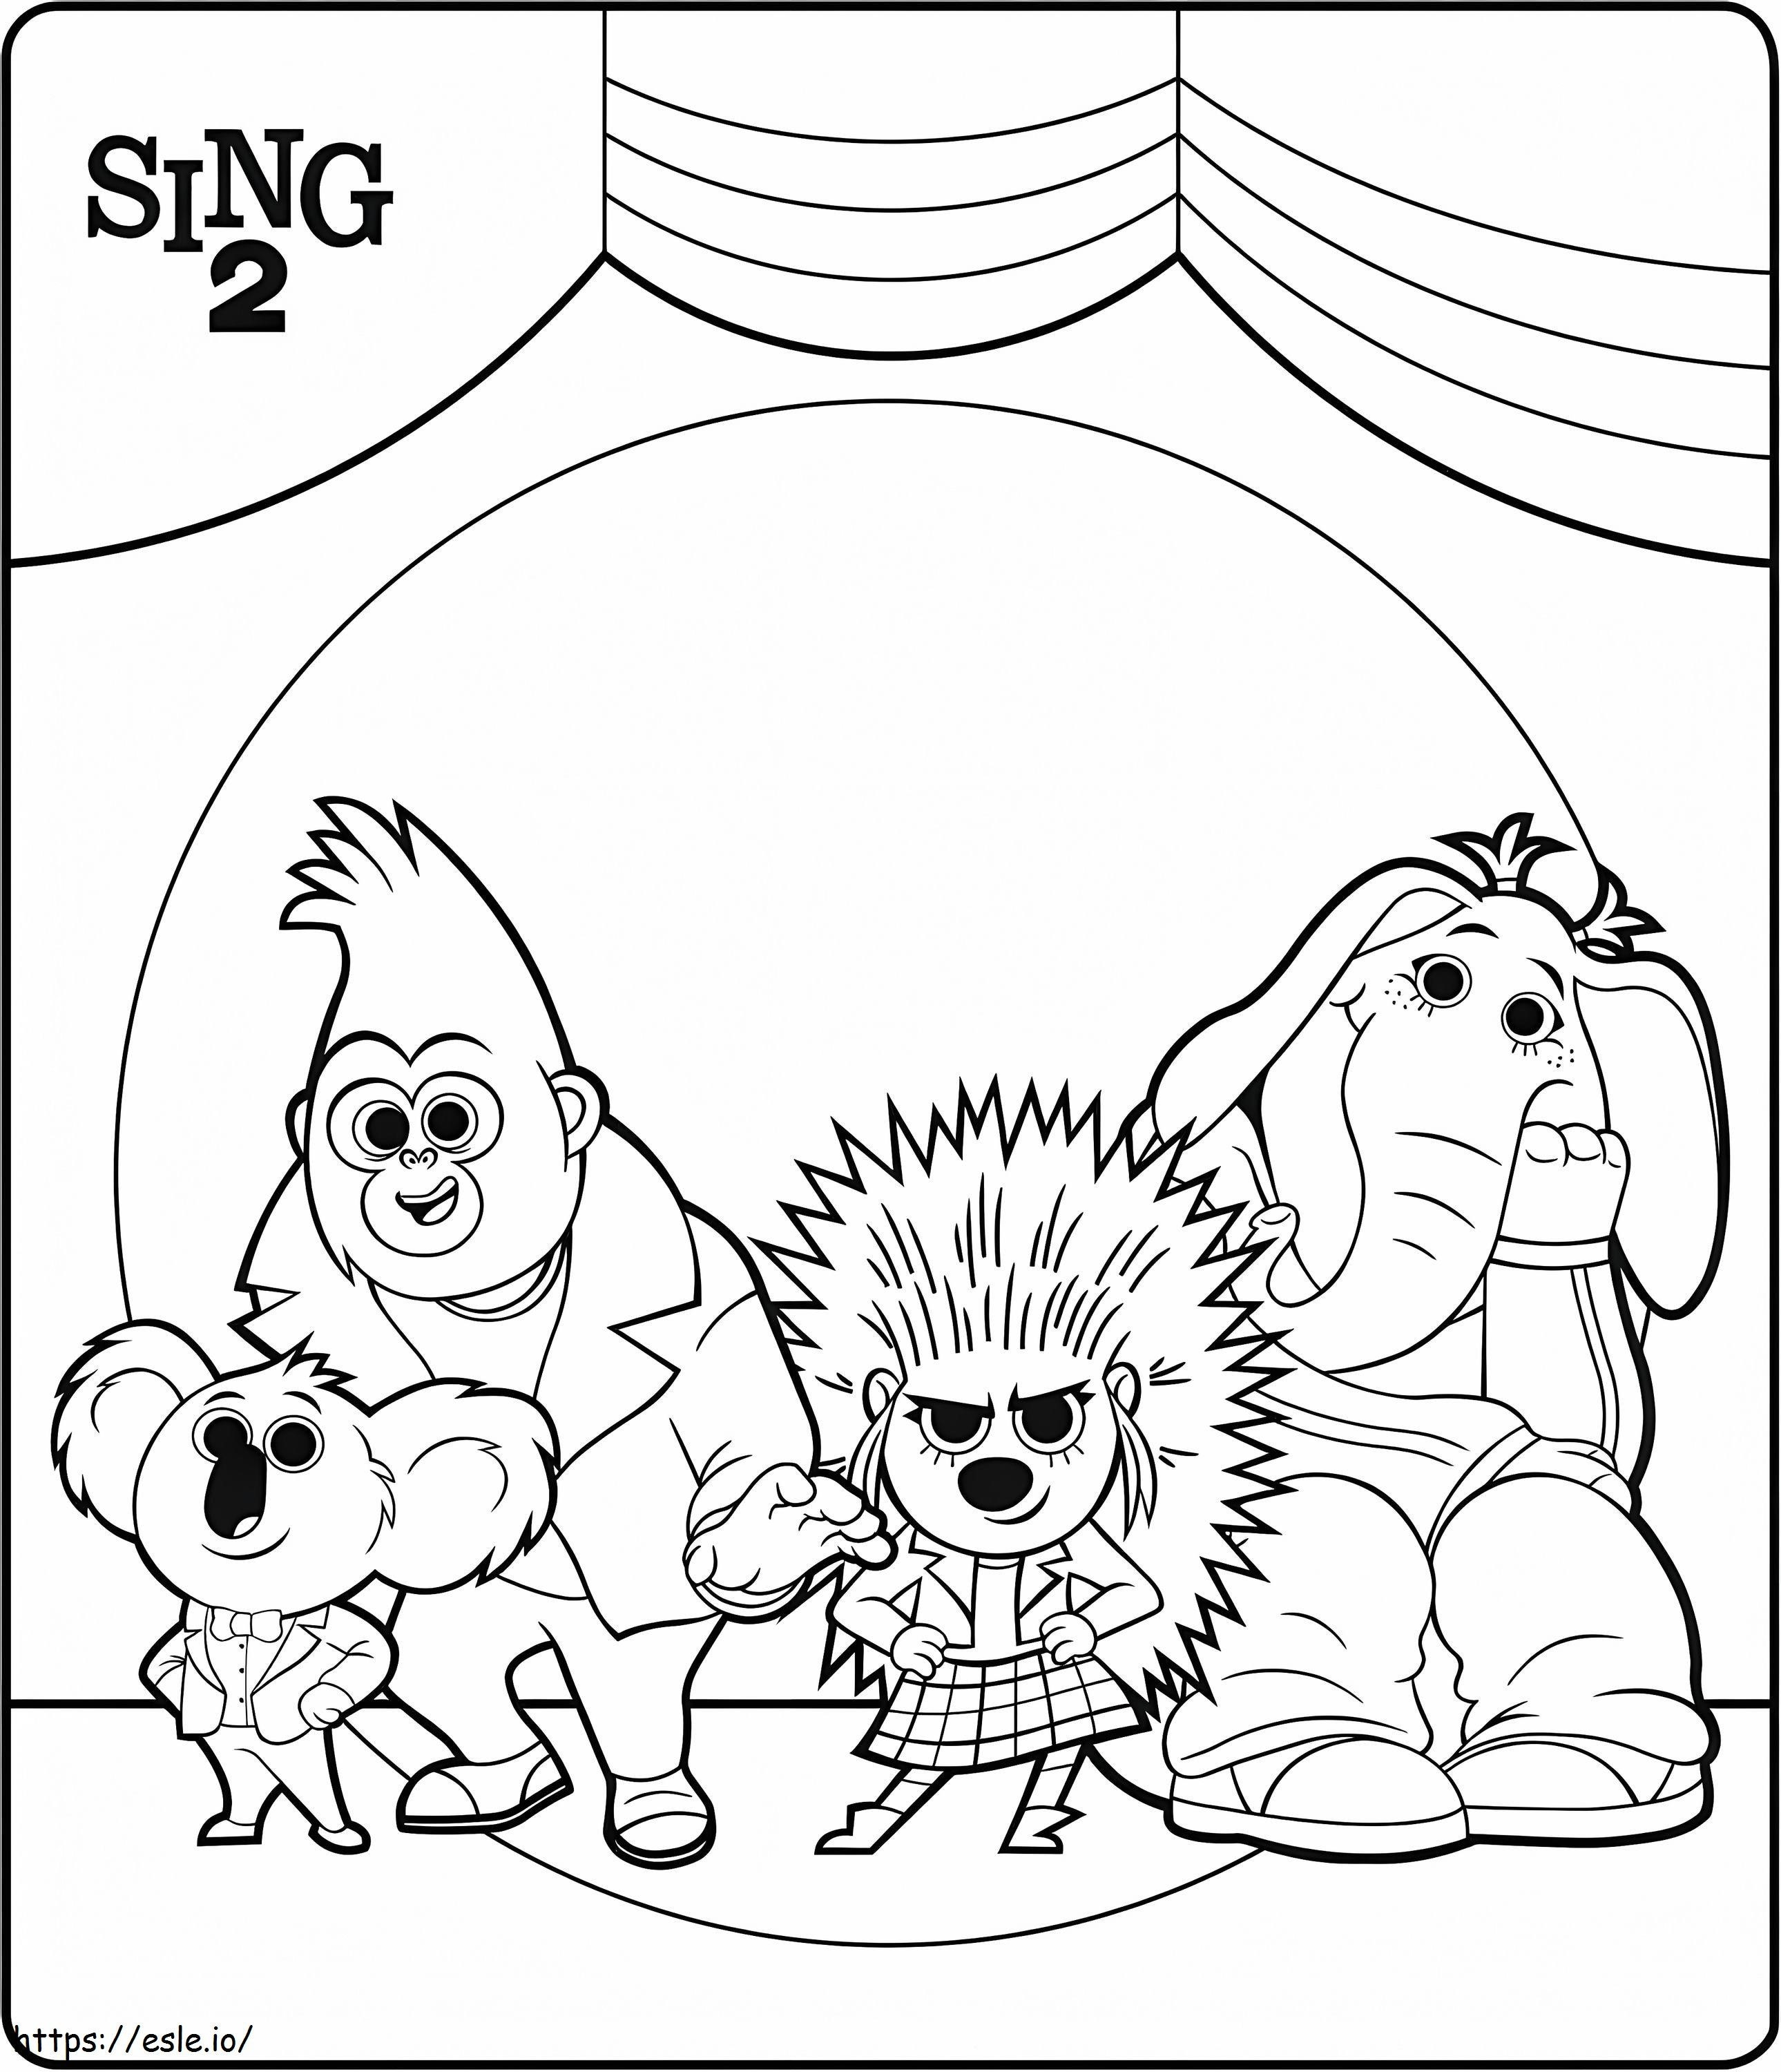 Sing 2 Characters coloring page